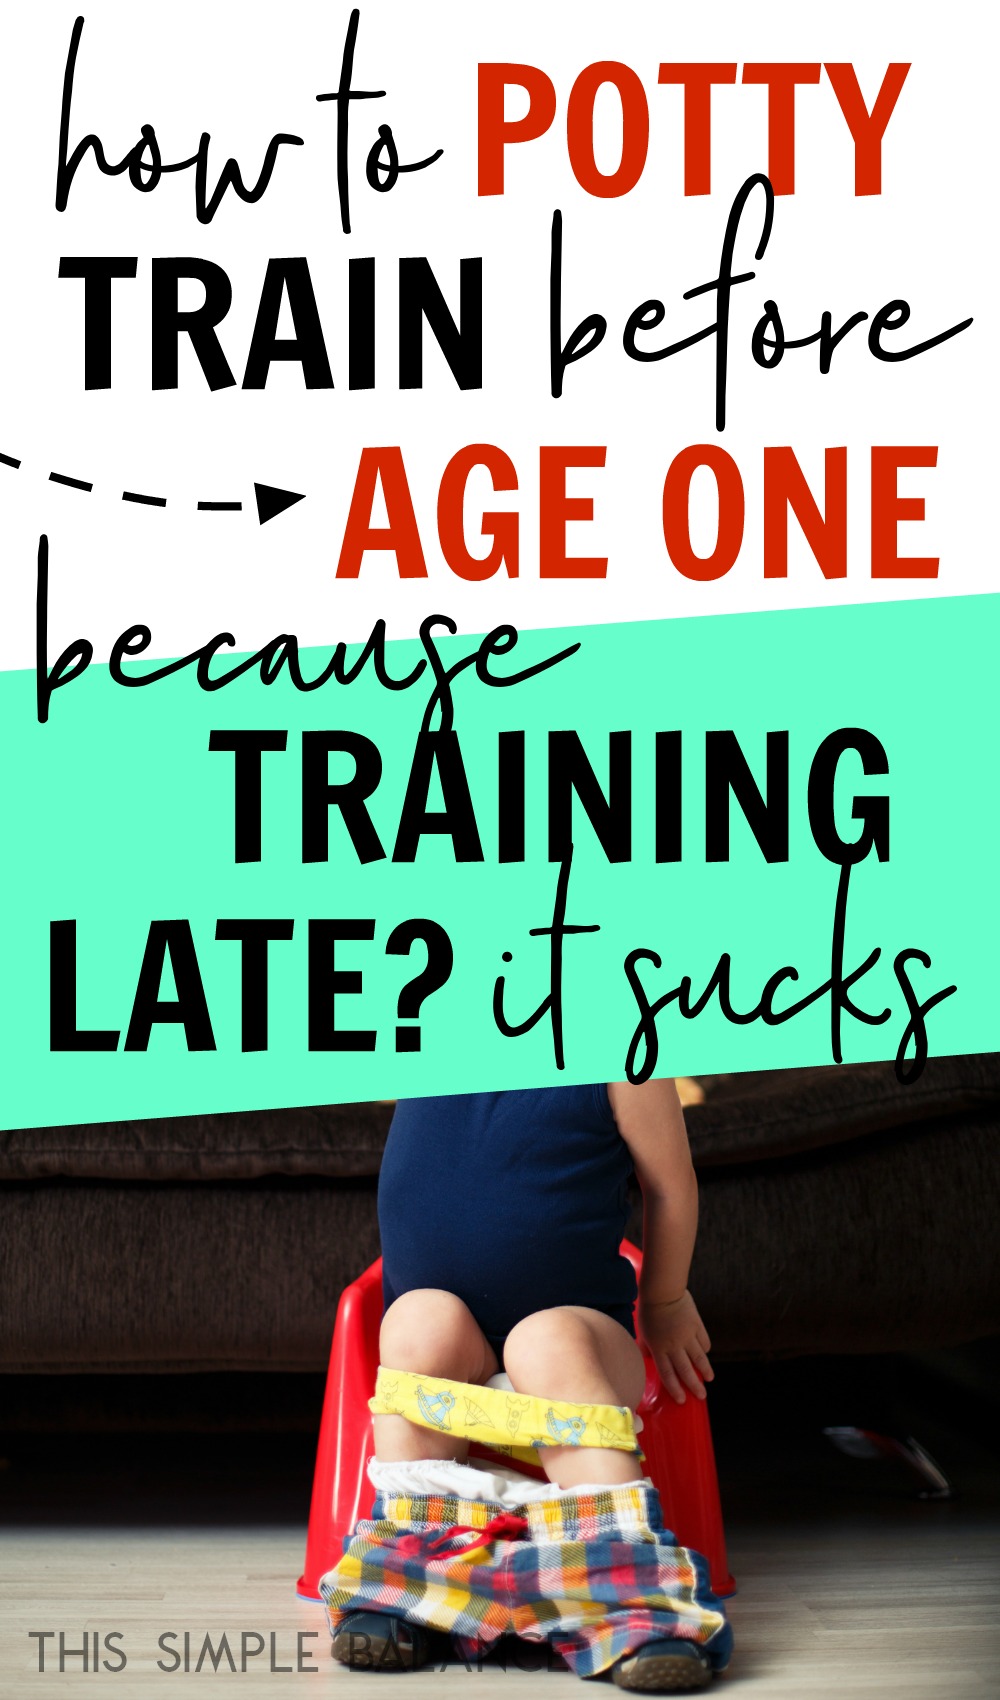 toddler, waist down, sitting on small potty, with text overlay, "how to potty train before age one because training late? it sucks"